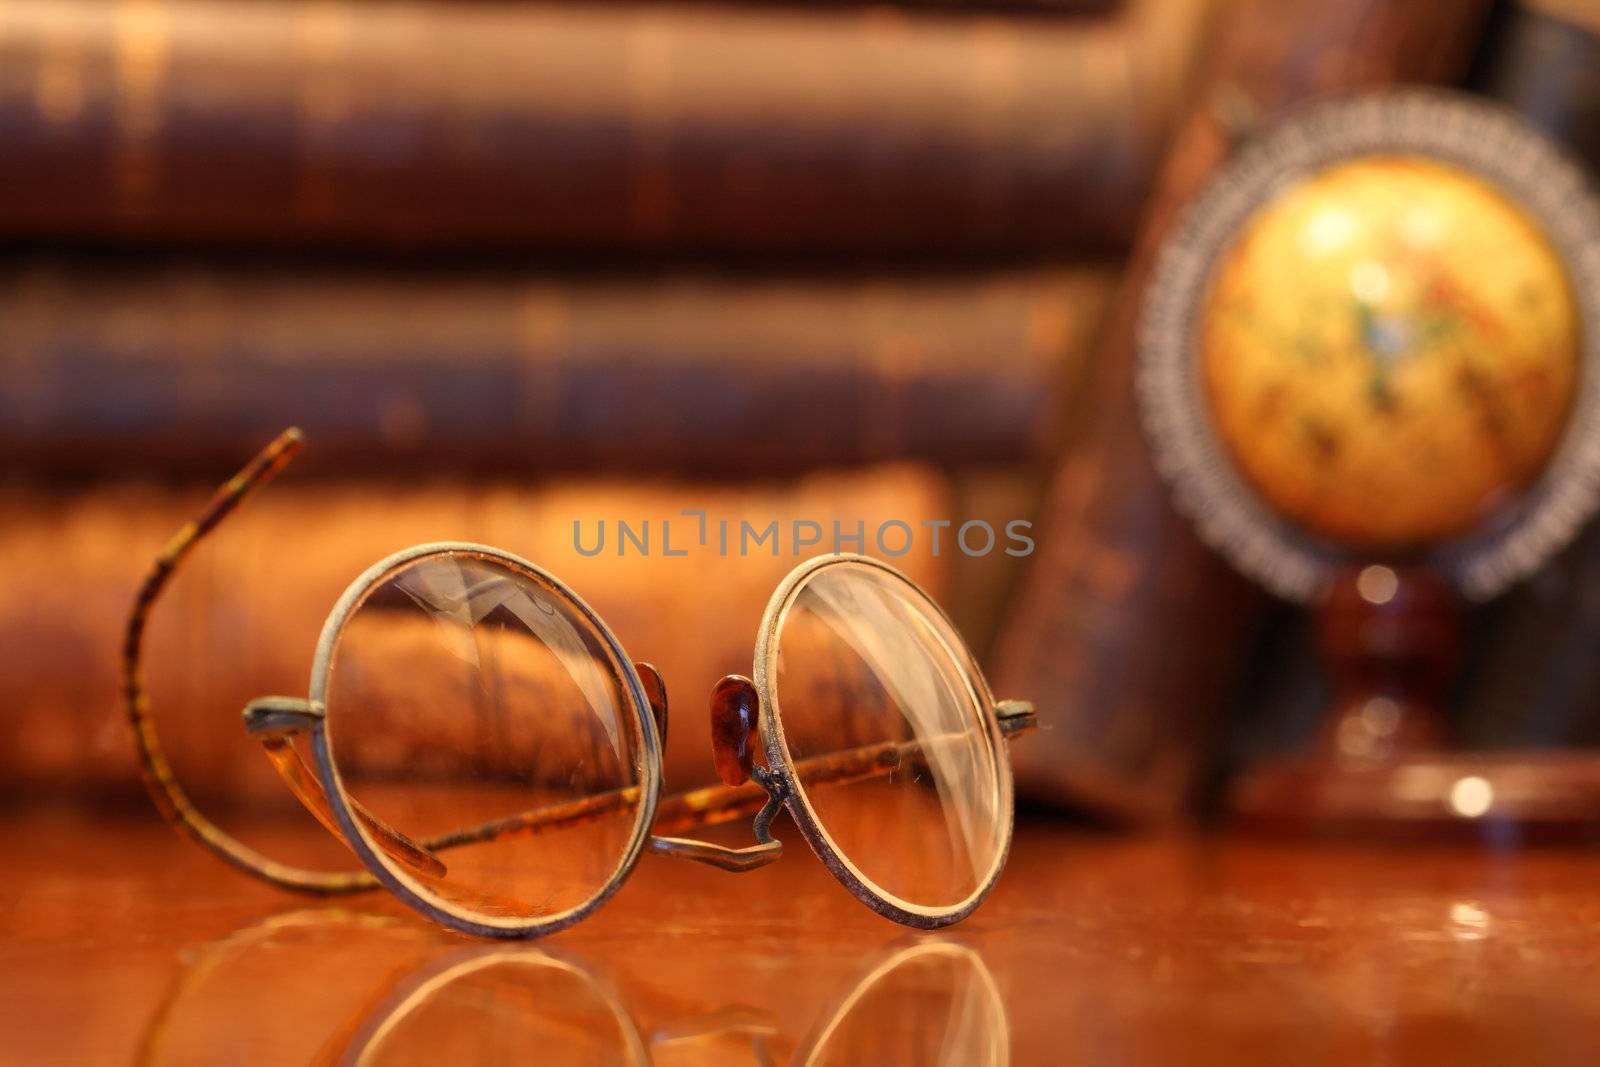 Vintage still life with old spectacles lying on wooden table on background with books and globe